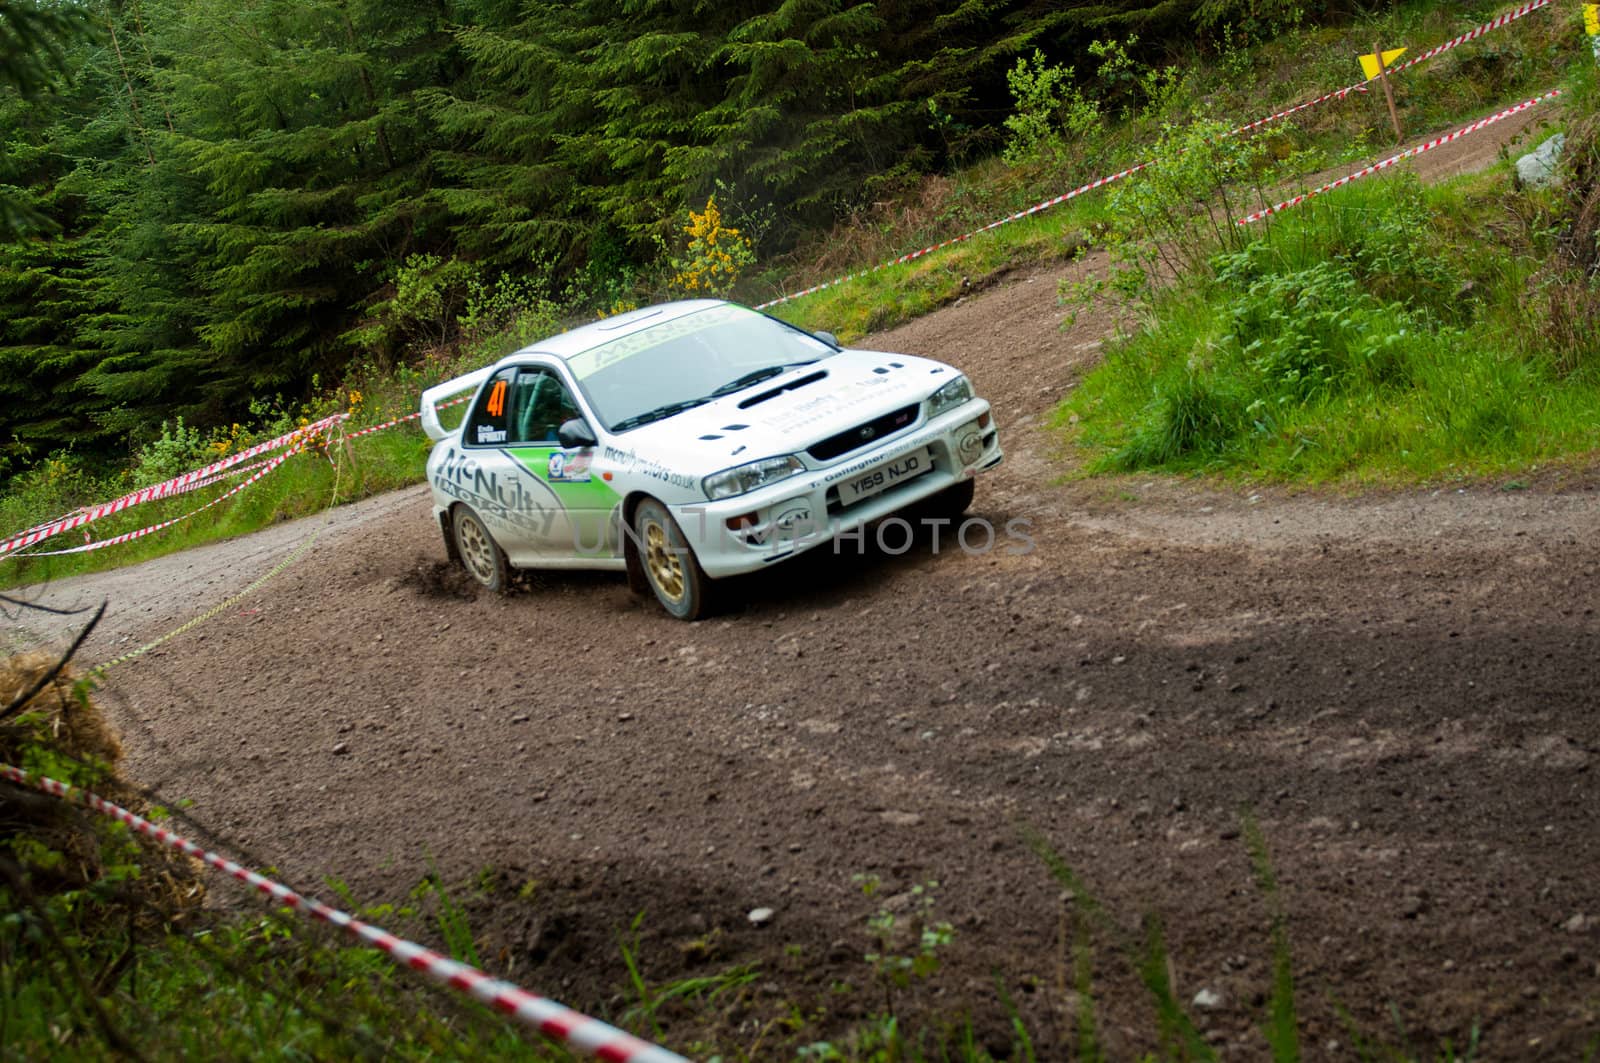 MALLOW, IRELAND - MAY 19: E. Mcnulty driving Subaru Impreza at the Jim Walsh Cork Forest Rally on May 19, 2012 in Mallow, Ireland. 4th round of the Valvoline National Forest Rally Championship.